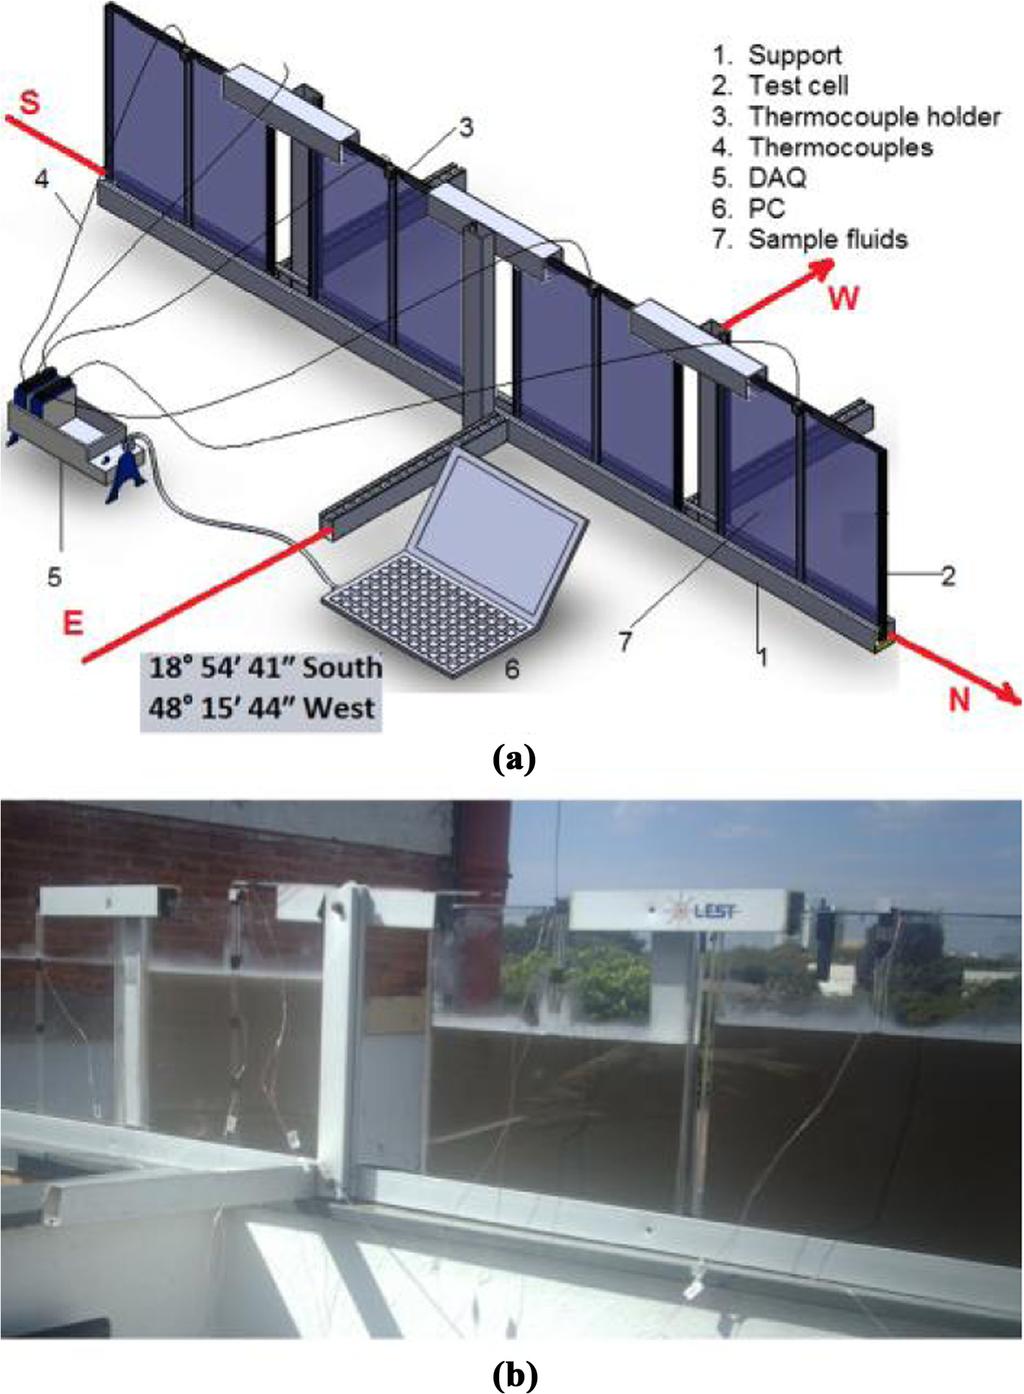 Bozorgan and Shafahi Micro and Nano Systems Letters (2015) 3:5 Page 5 of 15 Figure 5 Experimental system: (a) a schematic illustration and (b) a snapshot of the system under direct sunlight on top of